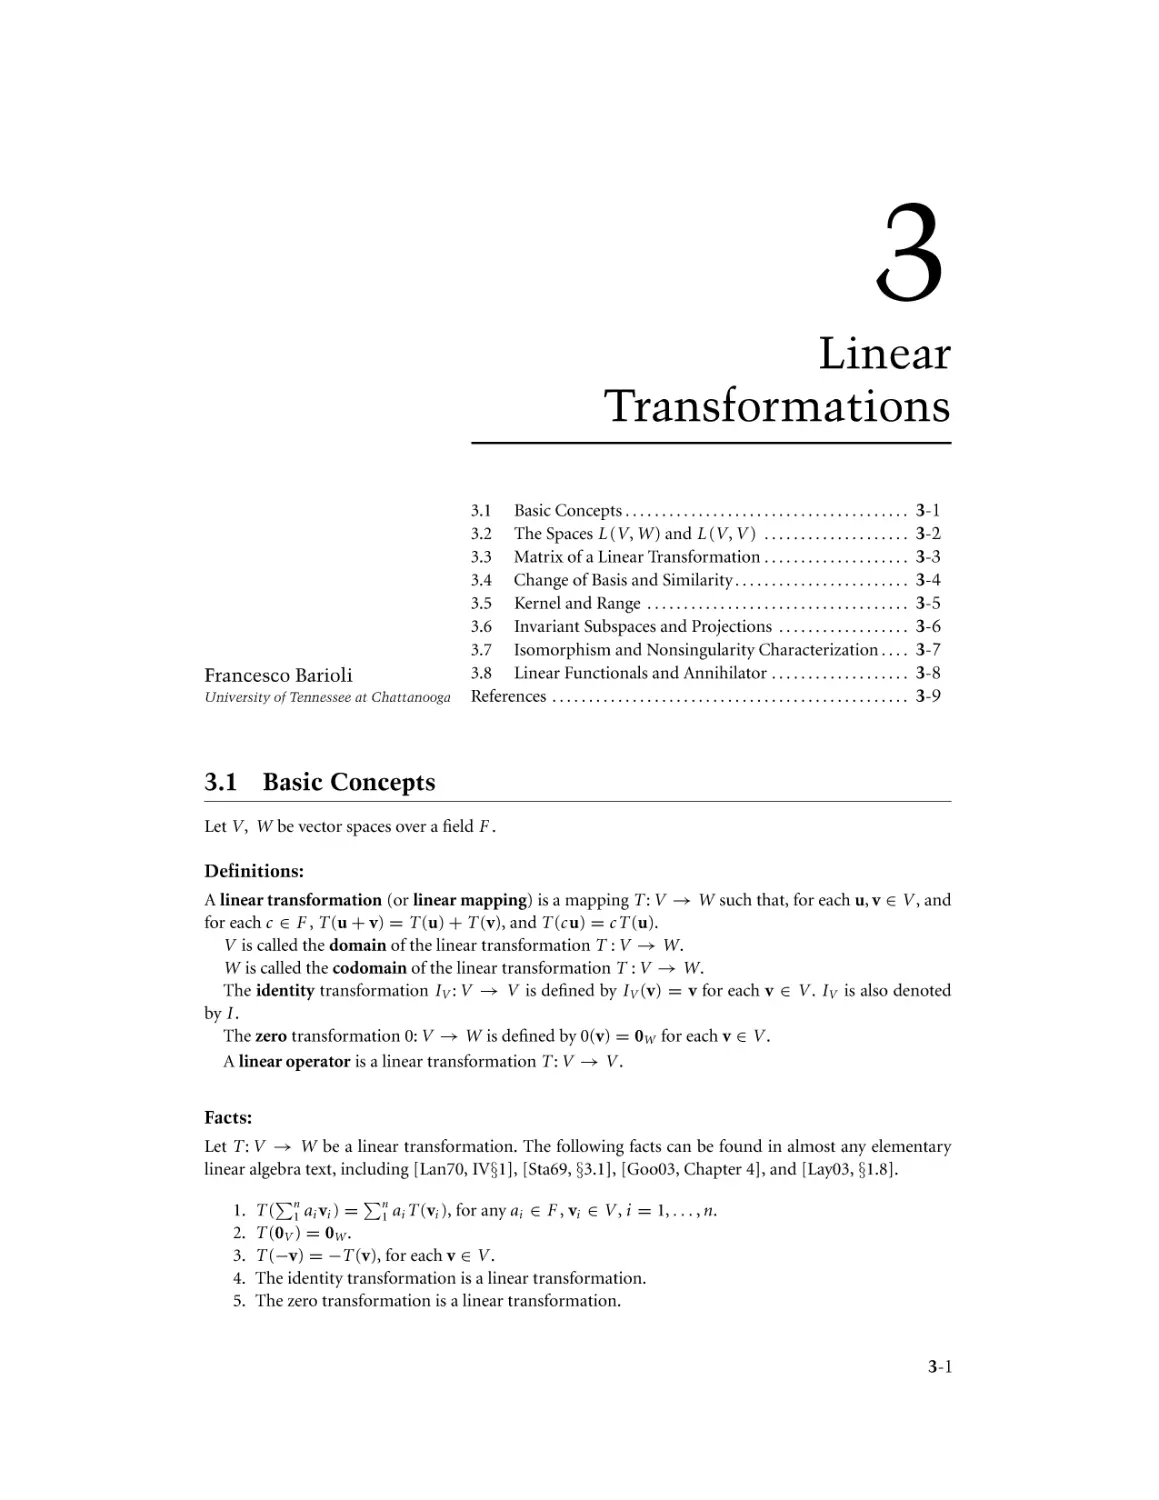 Chapter 3. Linear Transformations